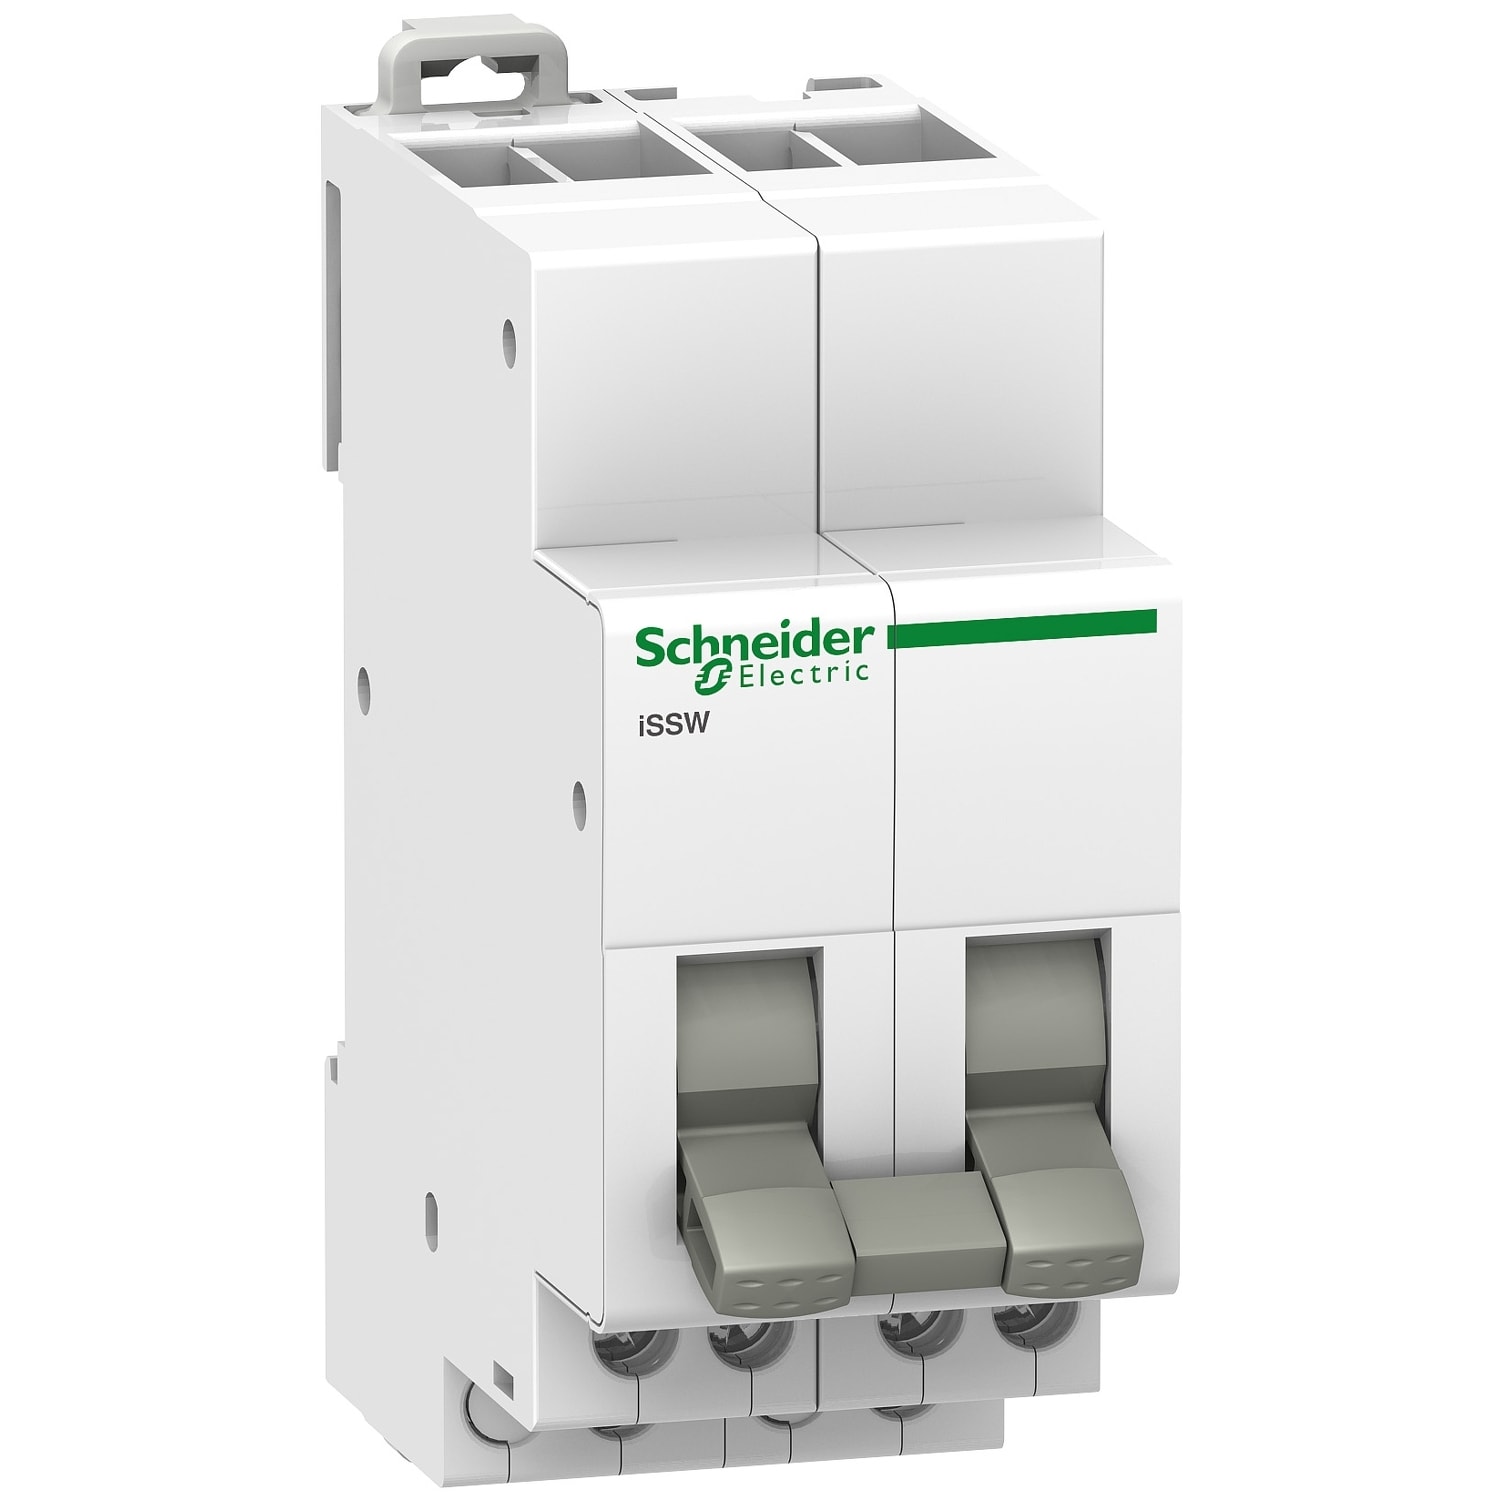 Schneider Electric - Acti9, iSSW commutateur 3 positions 2 contacts inverseurs OF 20A 230V